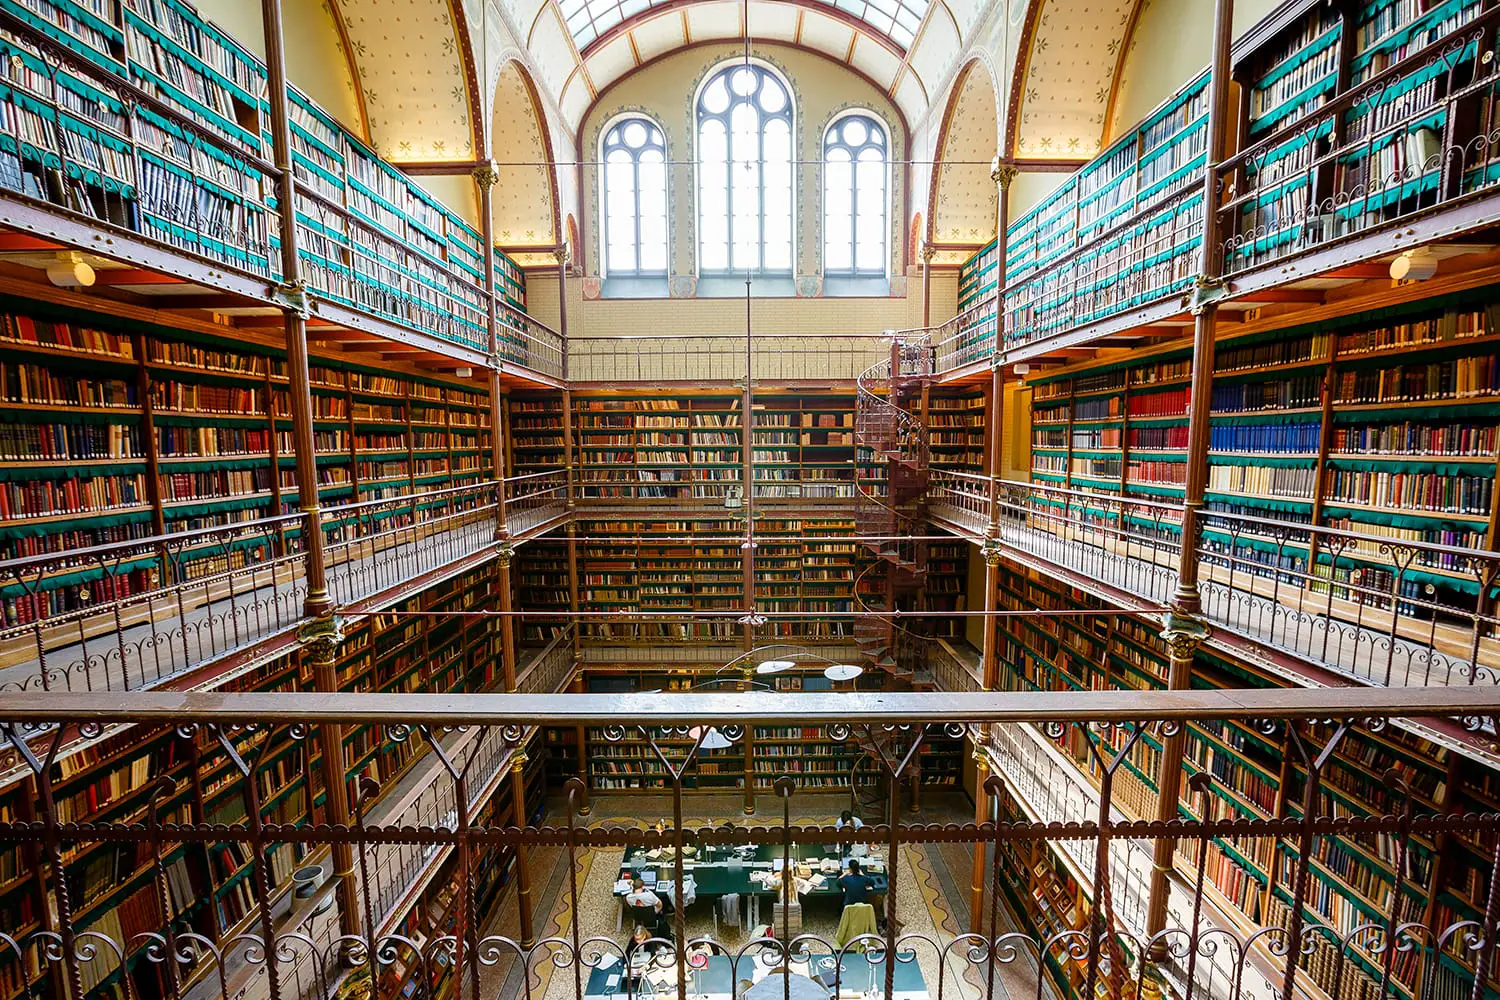 Rijksmuseum Research Library has the most extensive art history library in the Netherlands